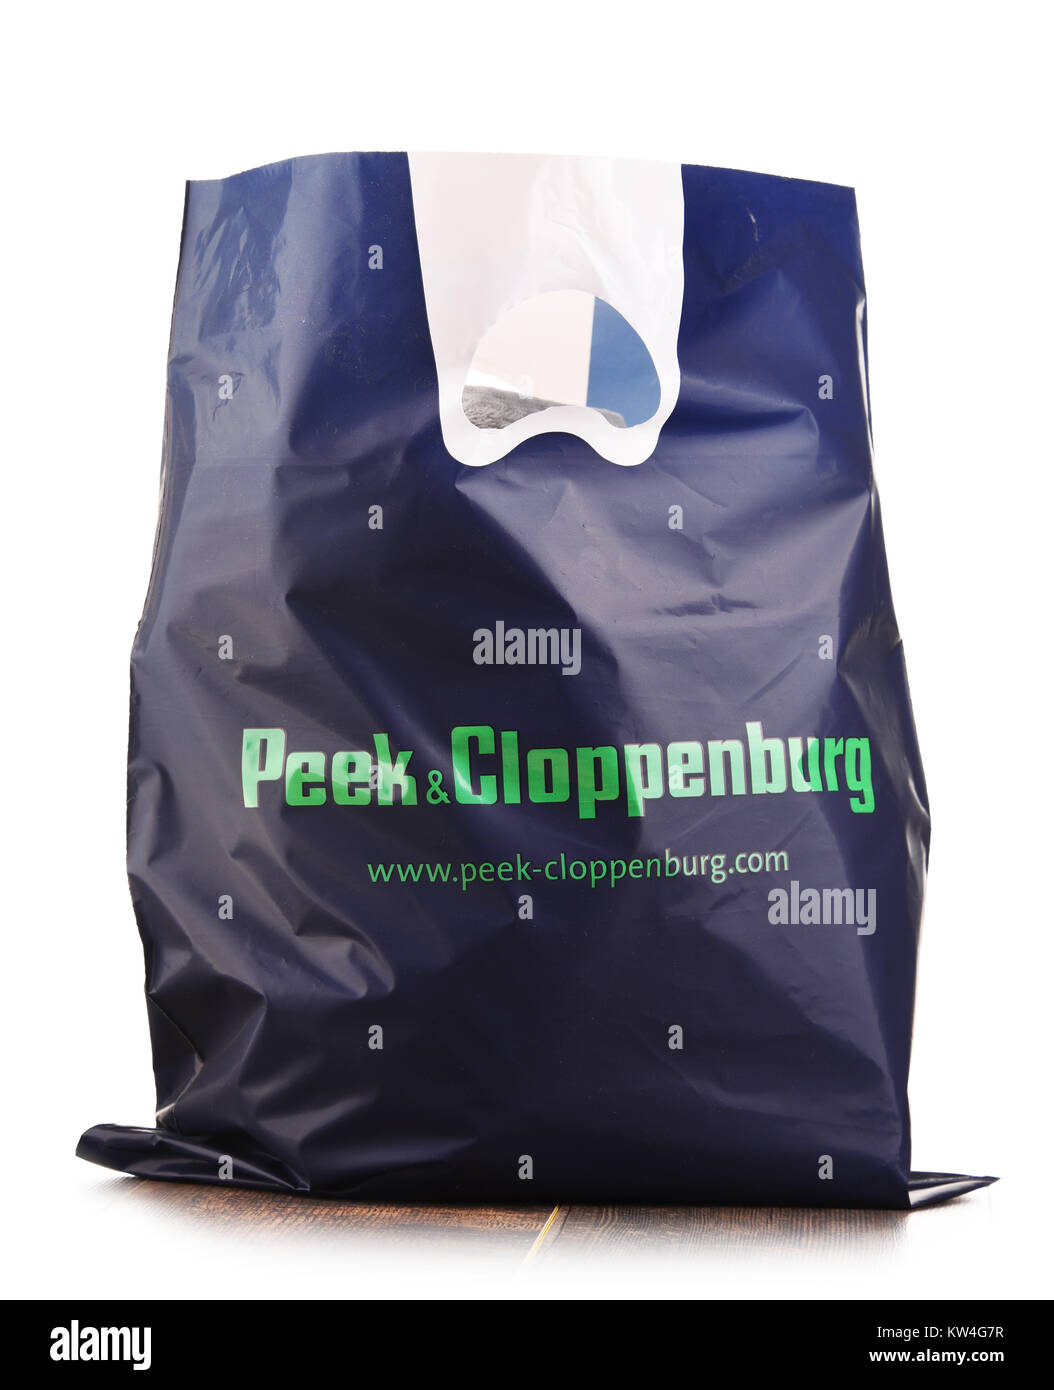 POZNAN, POLAND - DEC 7, 2017: Plastic shopping bag of Peek & Cloppenburg,  an international chain of retail clothing stores with headquarters in  German Stock Photo - Alamy